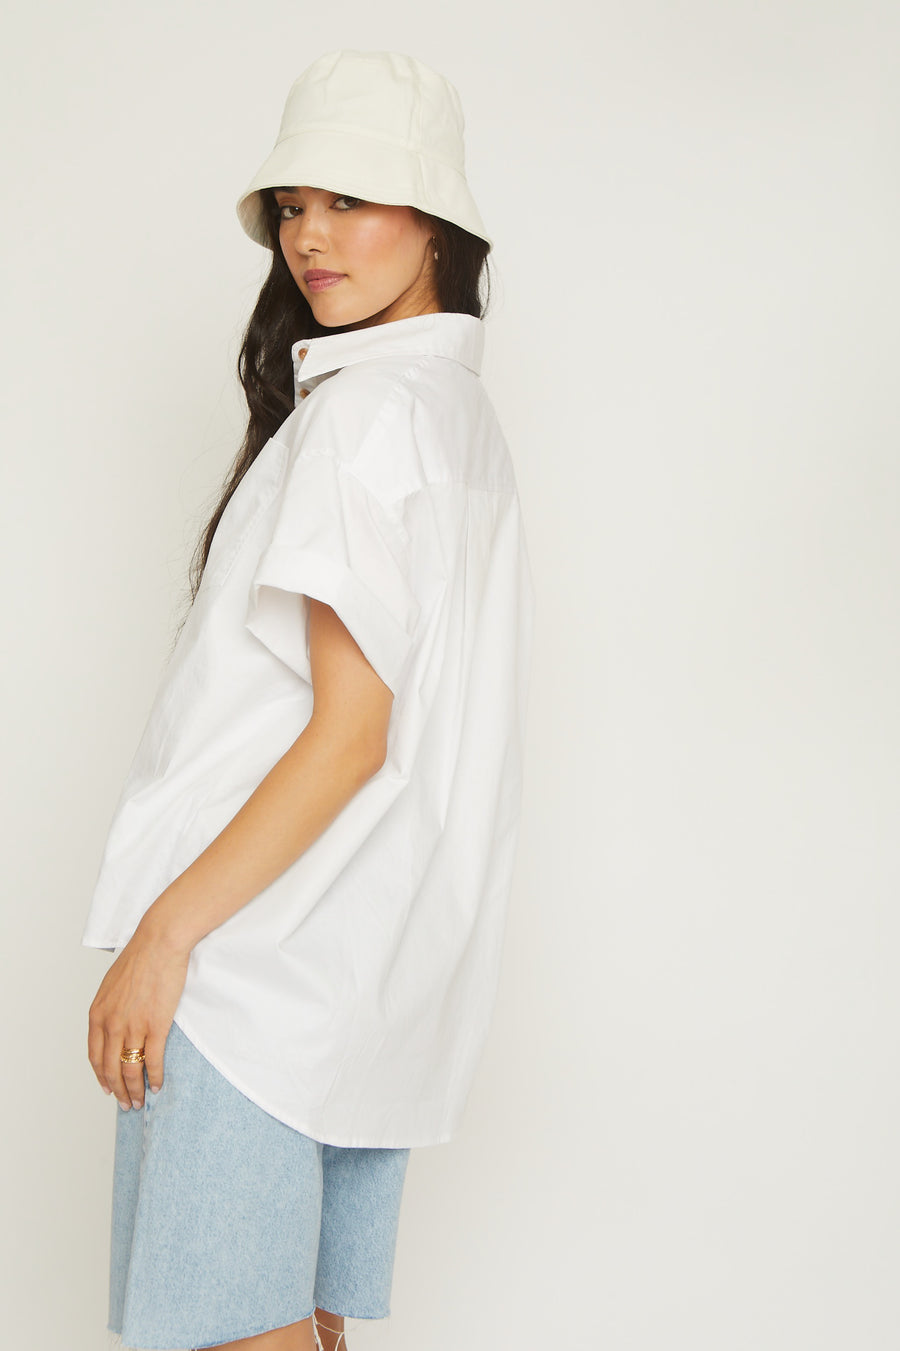 No Srcipt image - Images of 3 of 7 white button down shirt, 100% cotton, short sleeve, boxy, oversized fit, light-weight